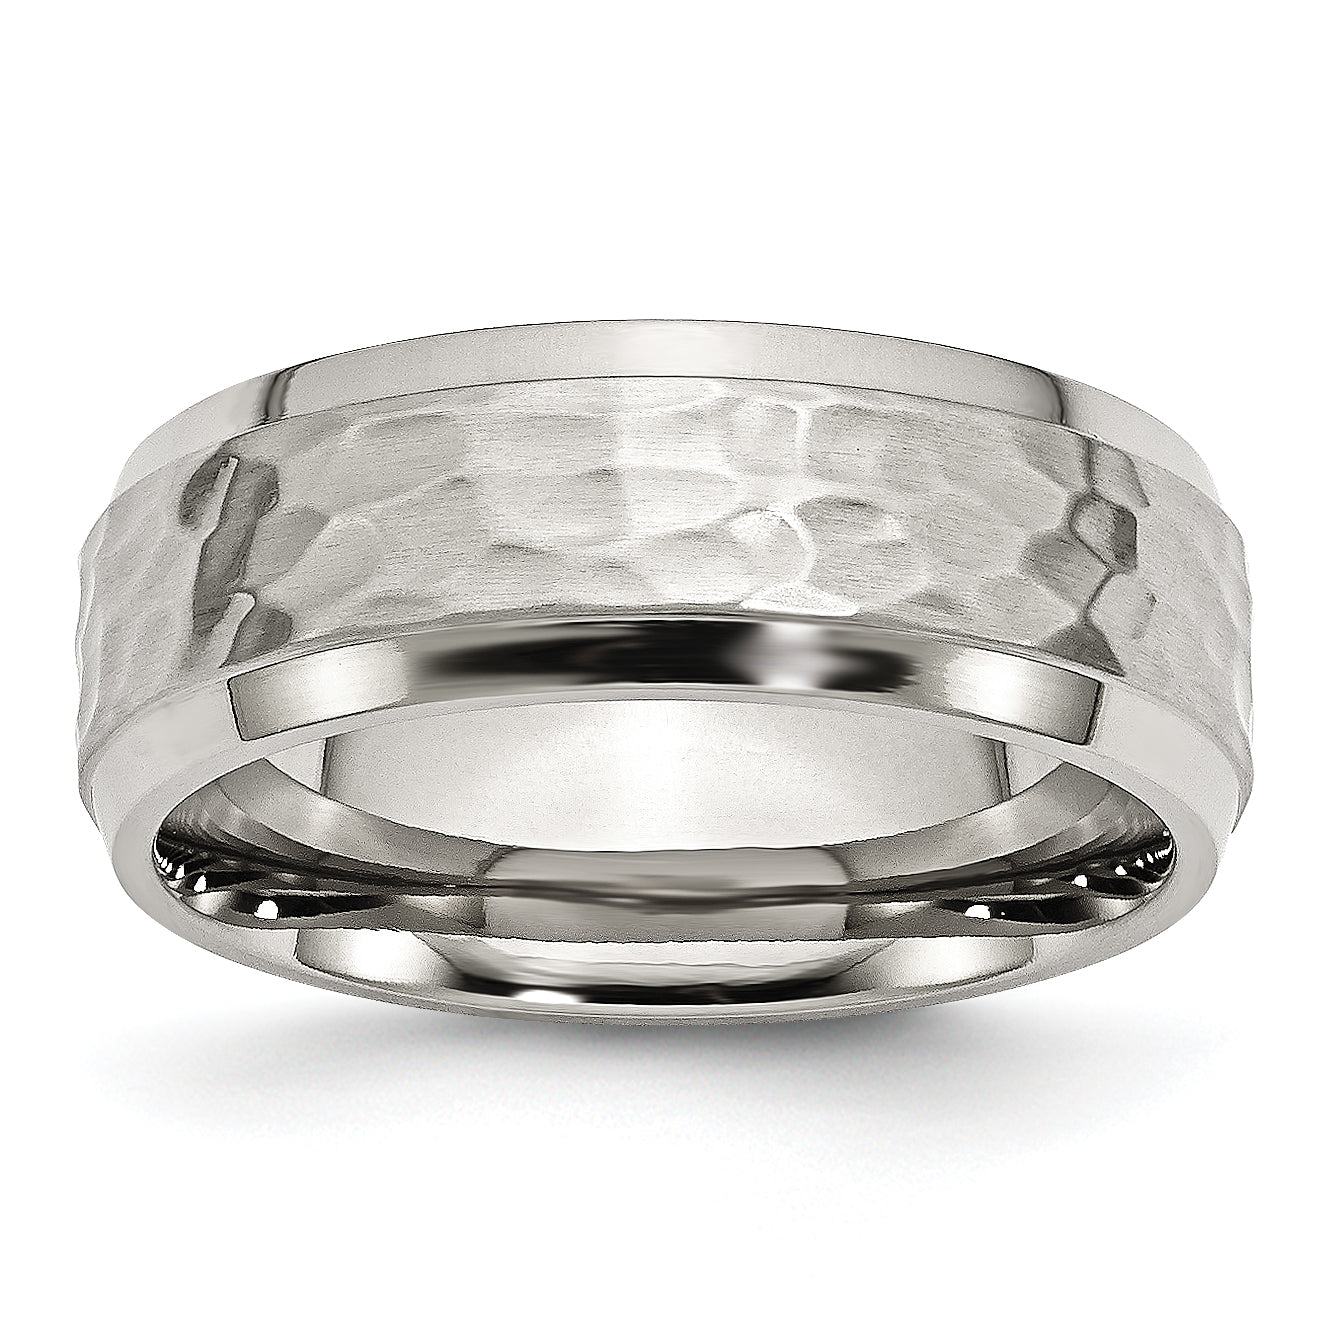 Stainless Steel Brushed Polished and Hammered 8mm Beveled Edge Band